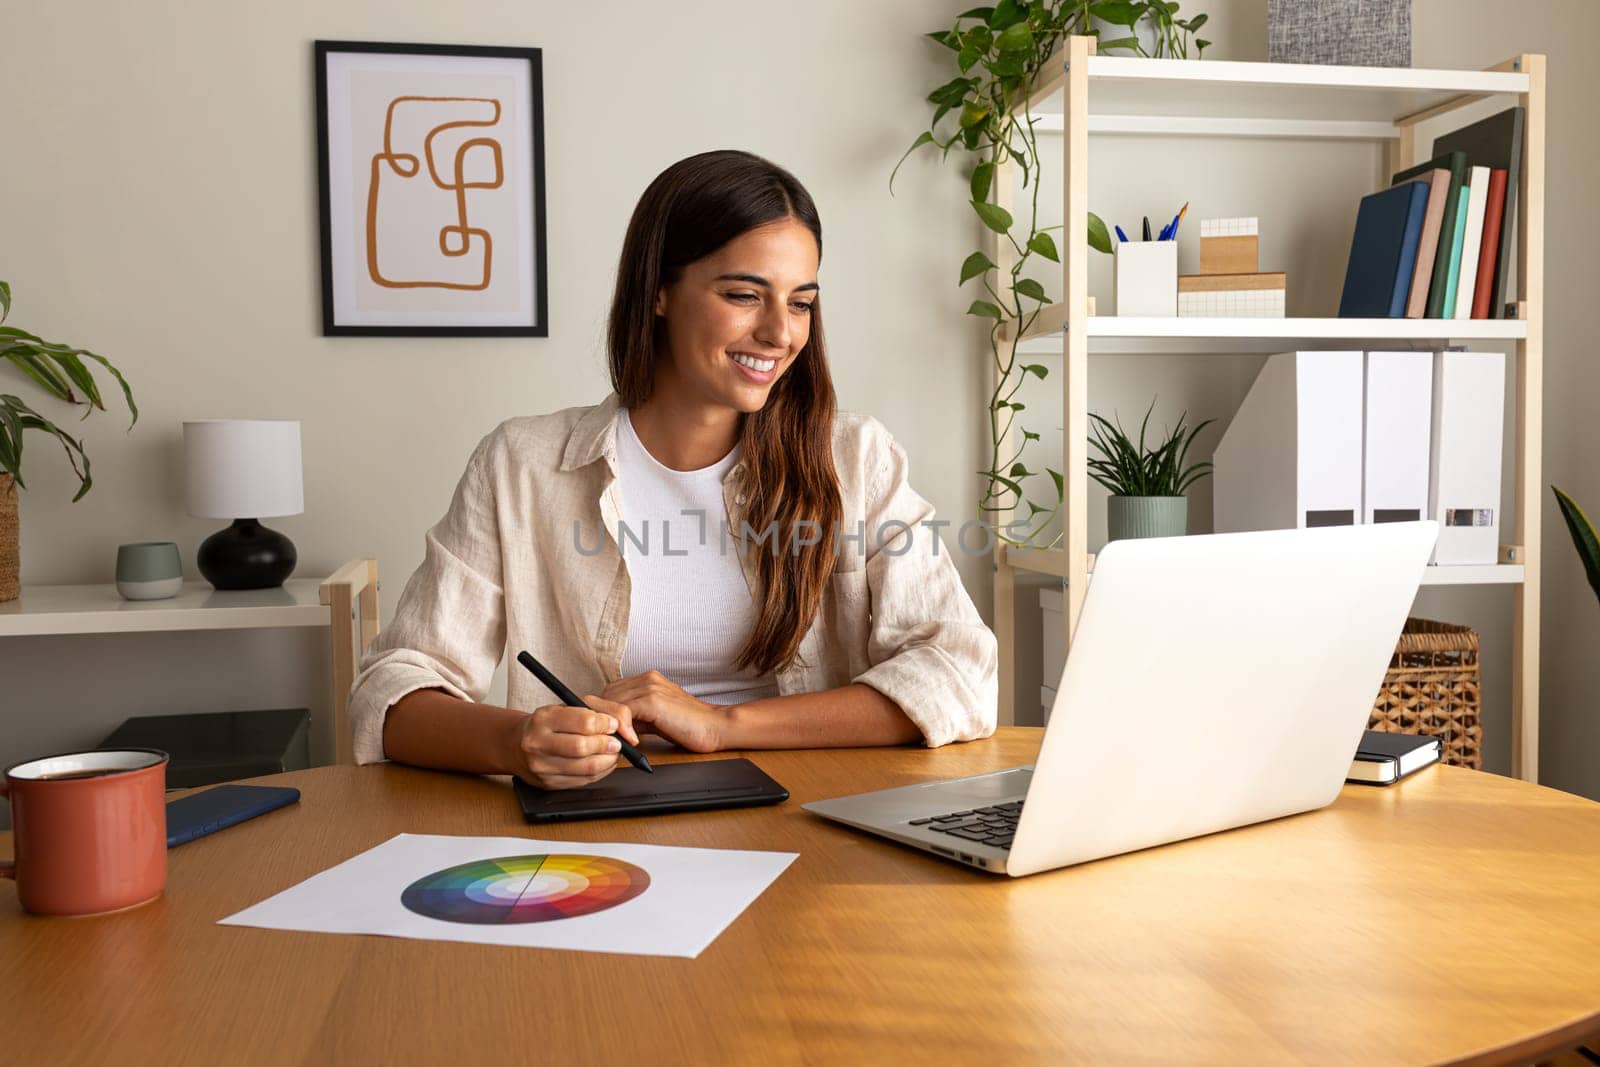 Female graphic designer working at home using laptop and graphic tablet. by Hoverstock